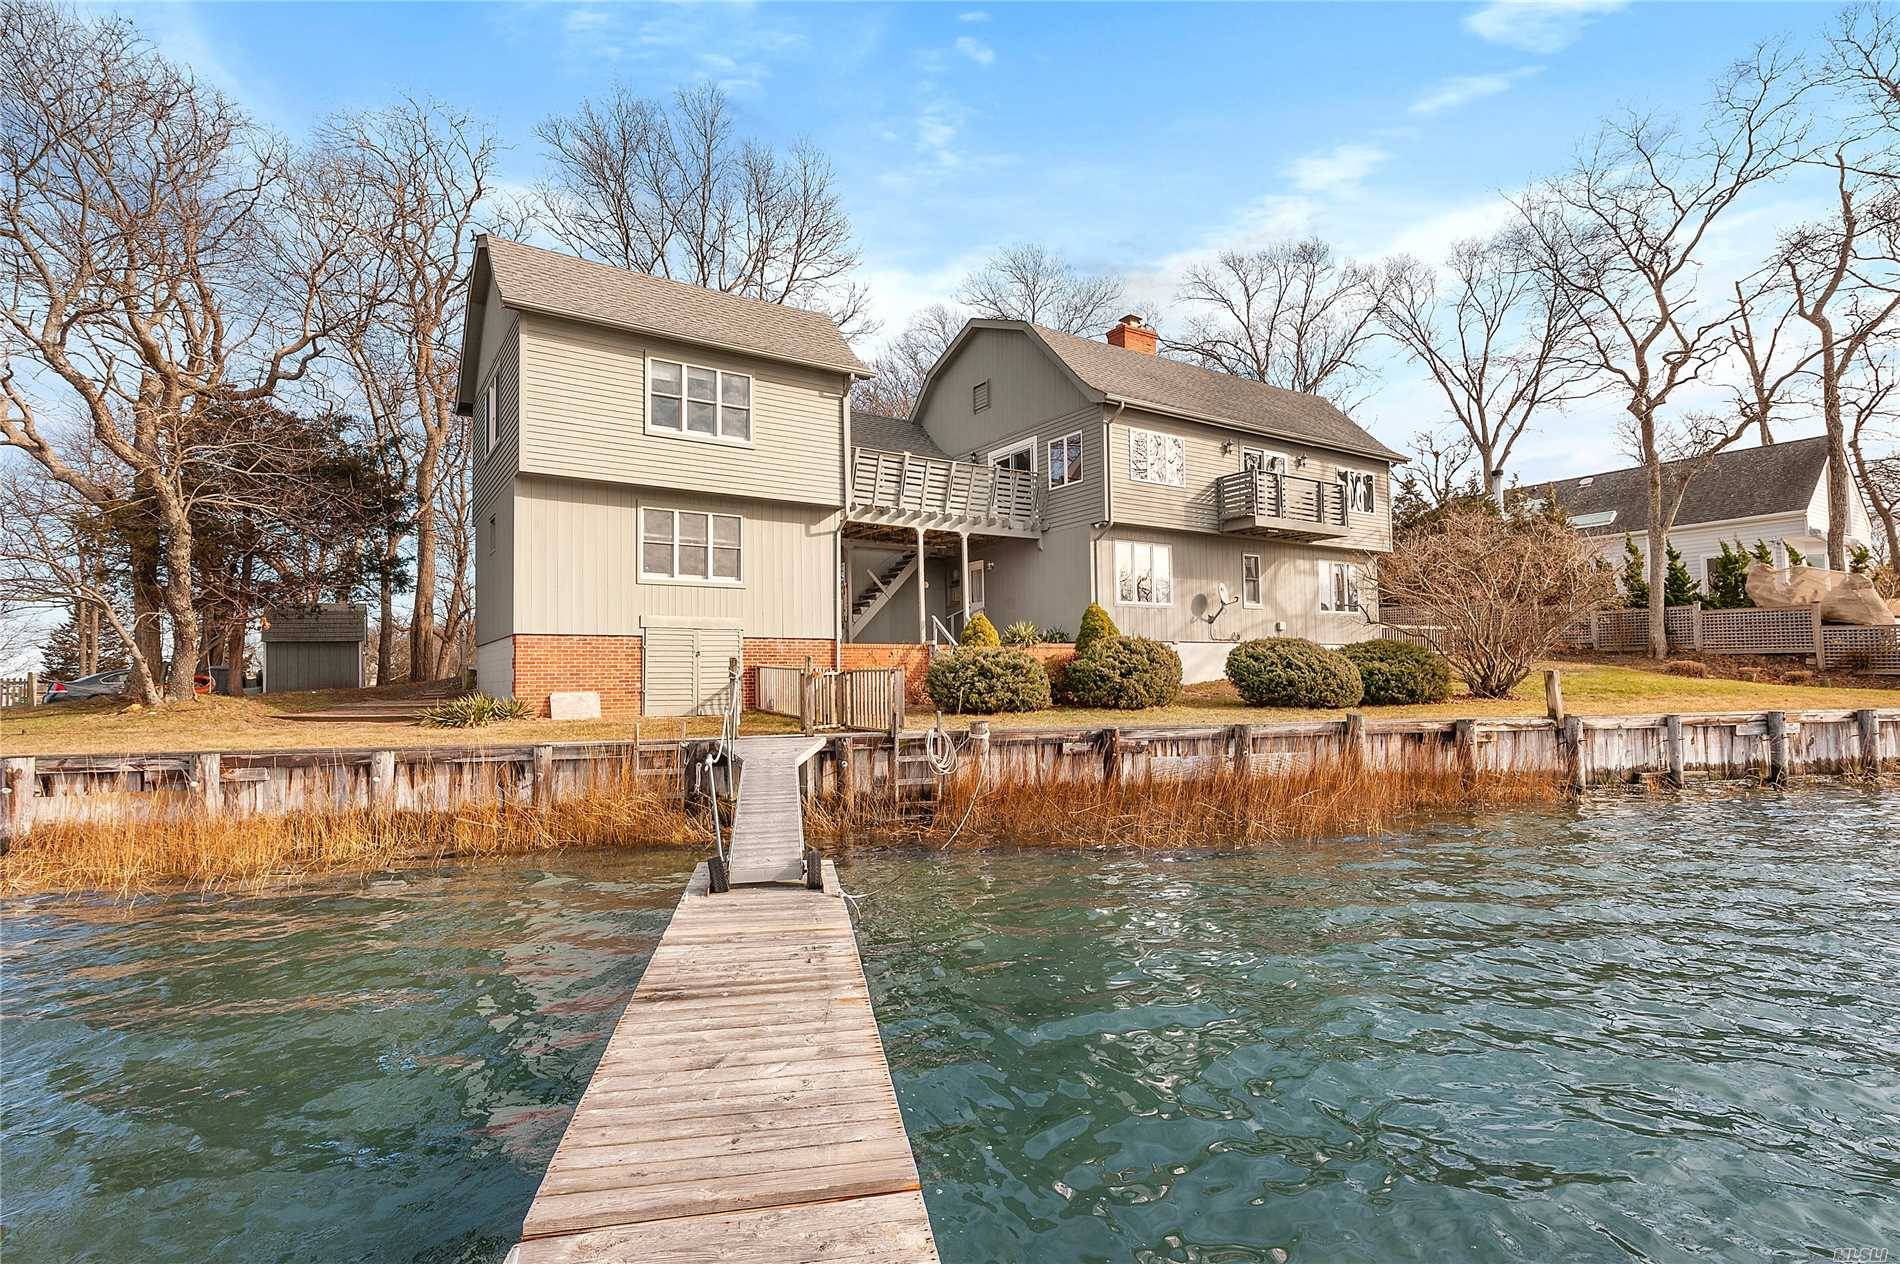 Tucked Away, Minutes From Sag Harbor Village, Rests A Magnificent Waterfront Opportunity.